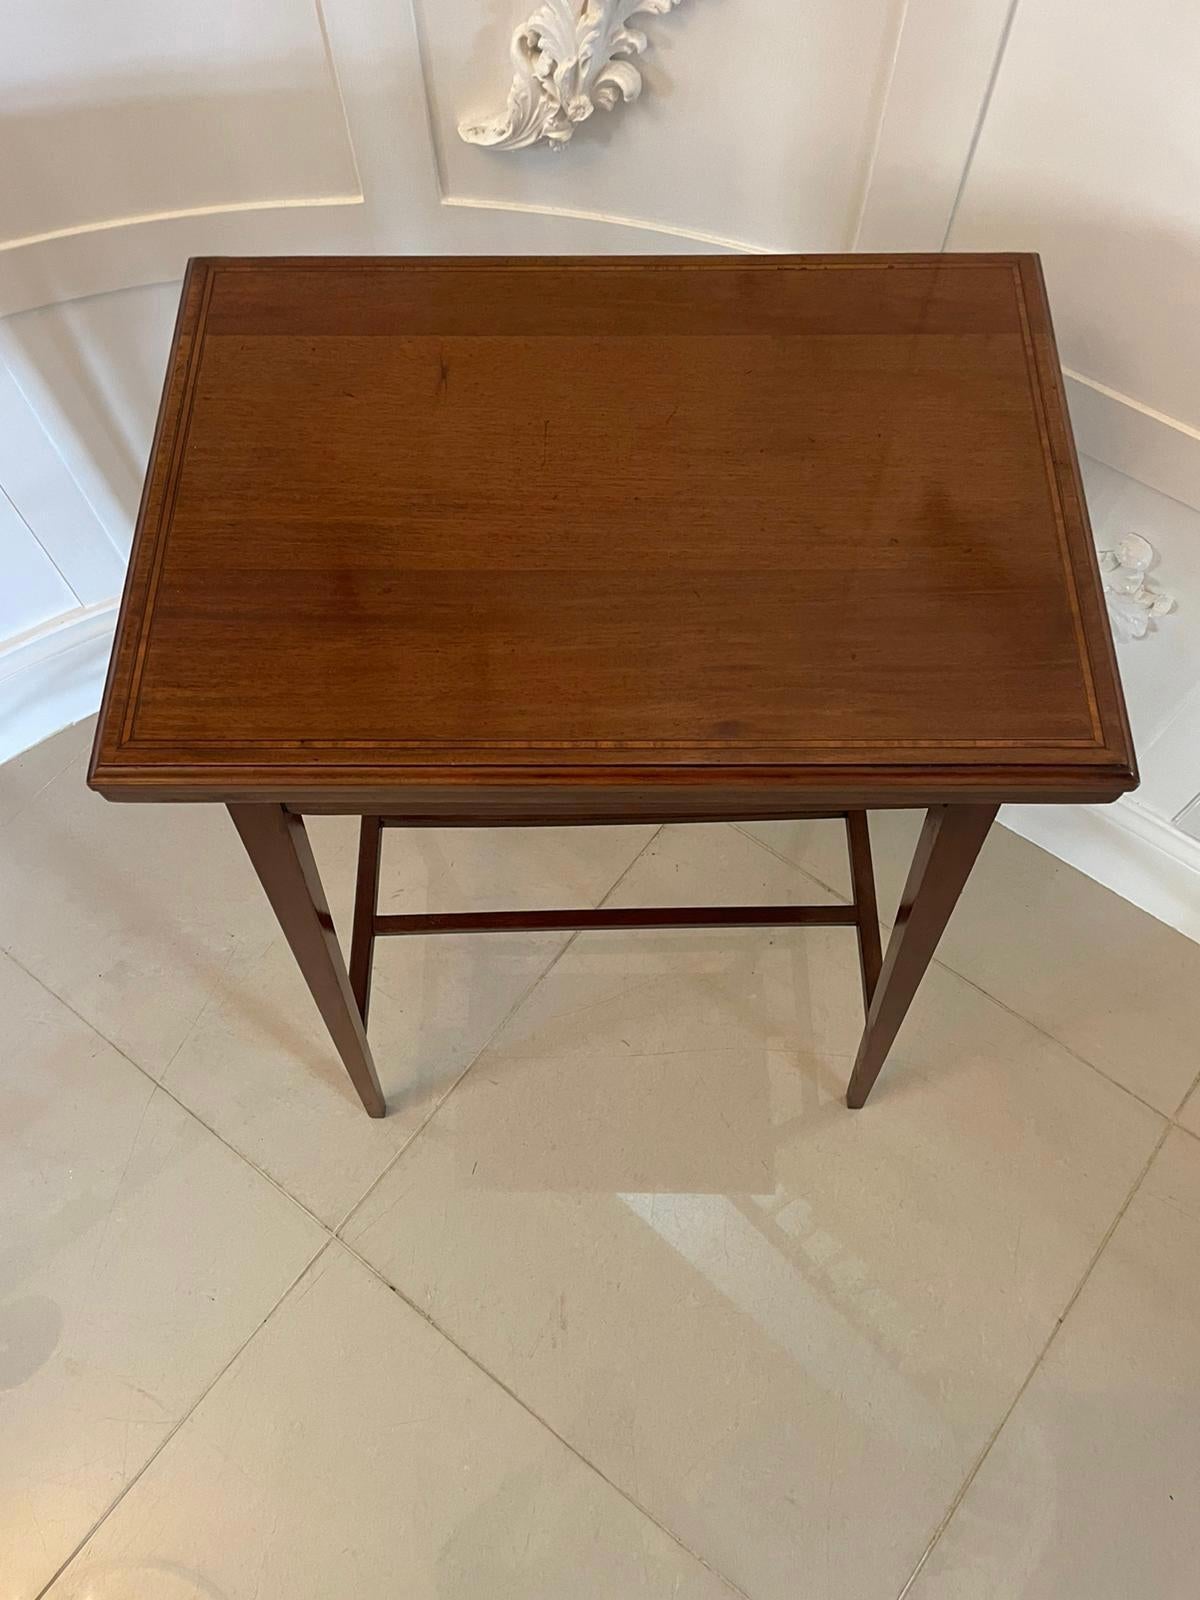 Antique Edwardian Quality Mahogany Inlaid Fold Over Card/Lamp Table For Sale 2